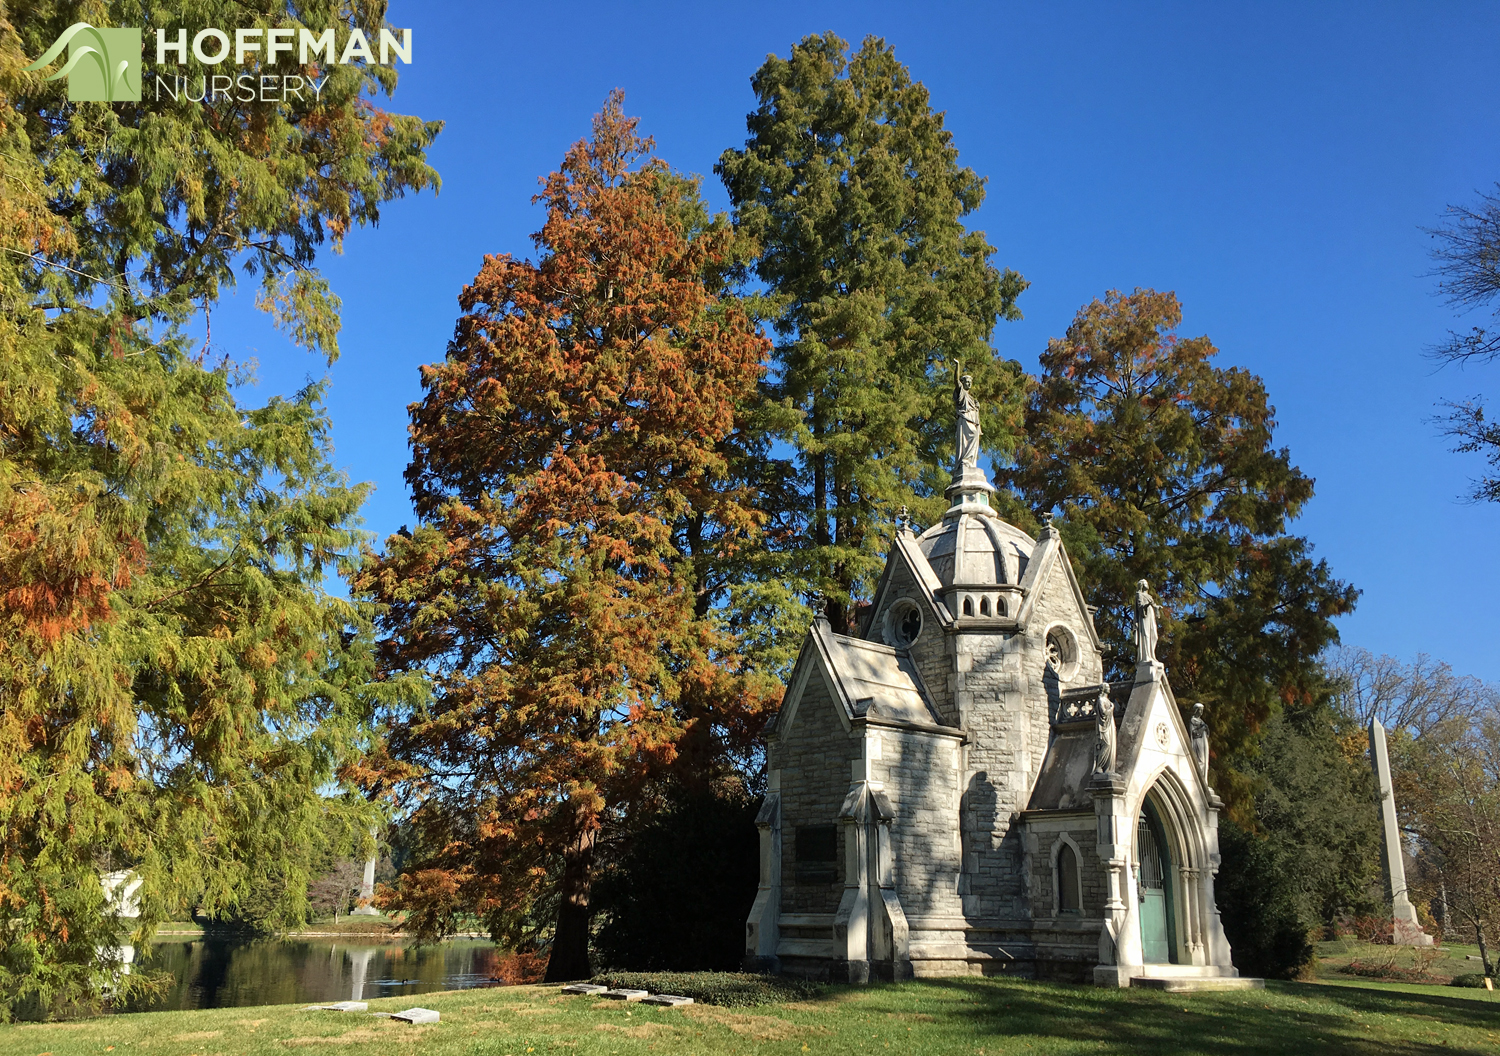 Spring Grove Cemetery & Arboretum has an extensive collection of aged trees and unusual specimens. Its beautiful memorial structures frame the landscape and highlight the beautiful fall colors.